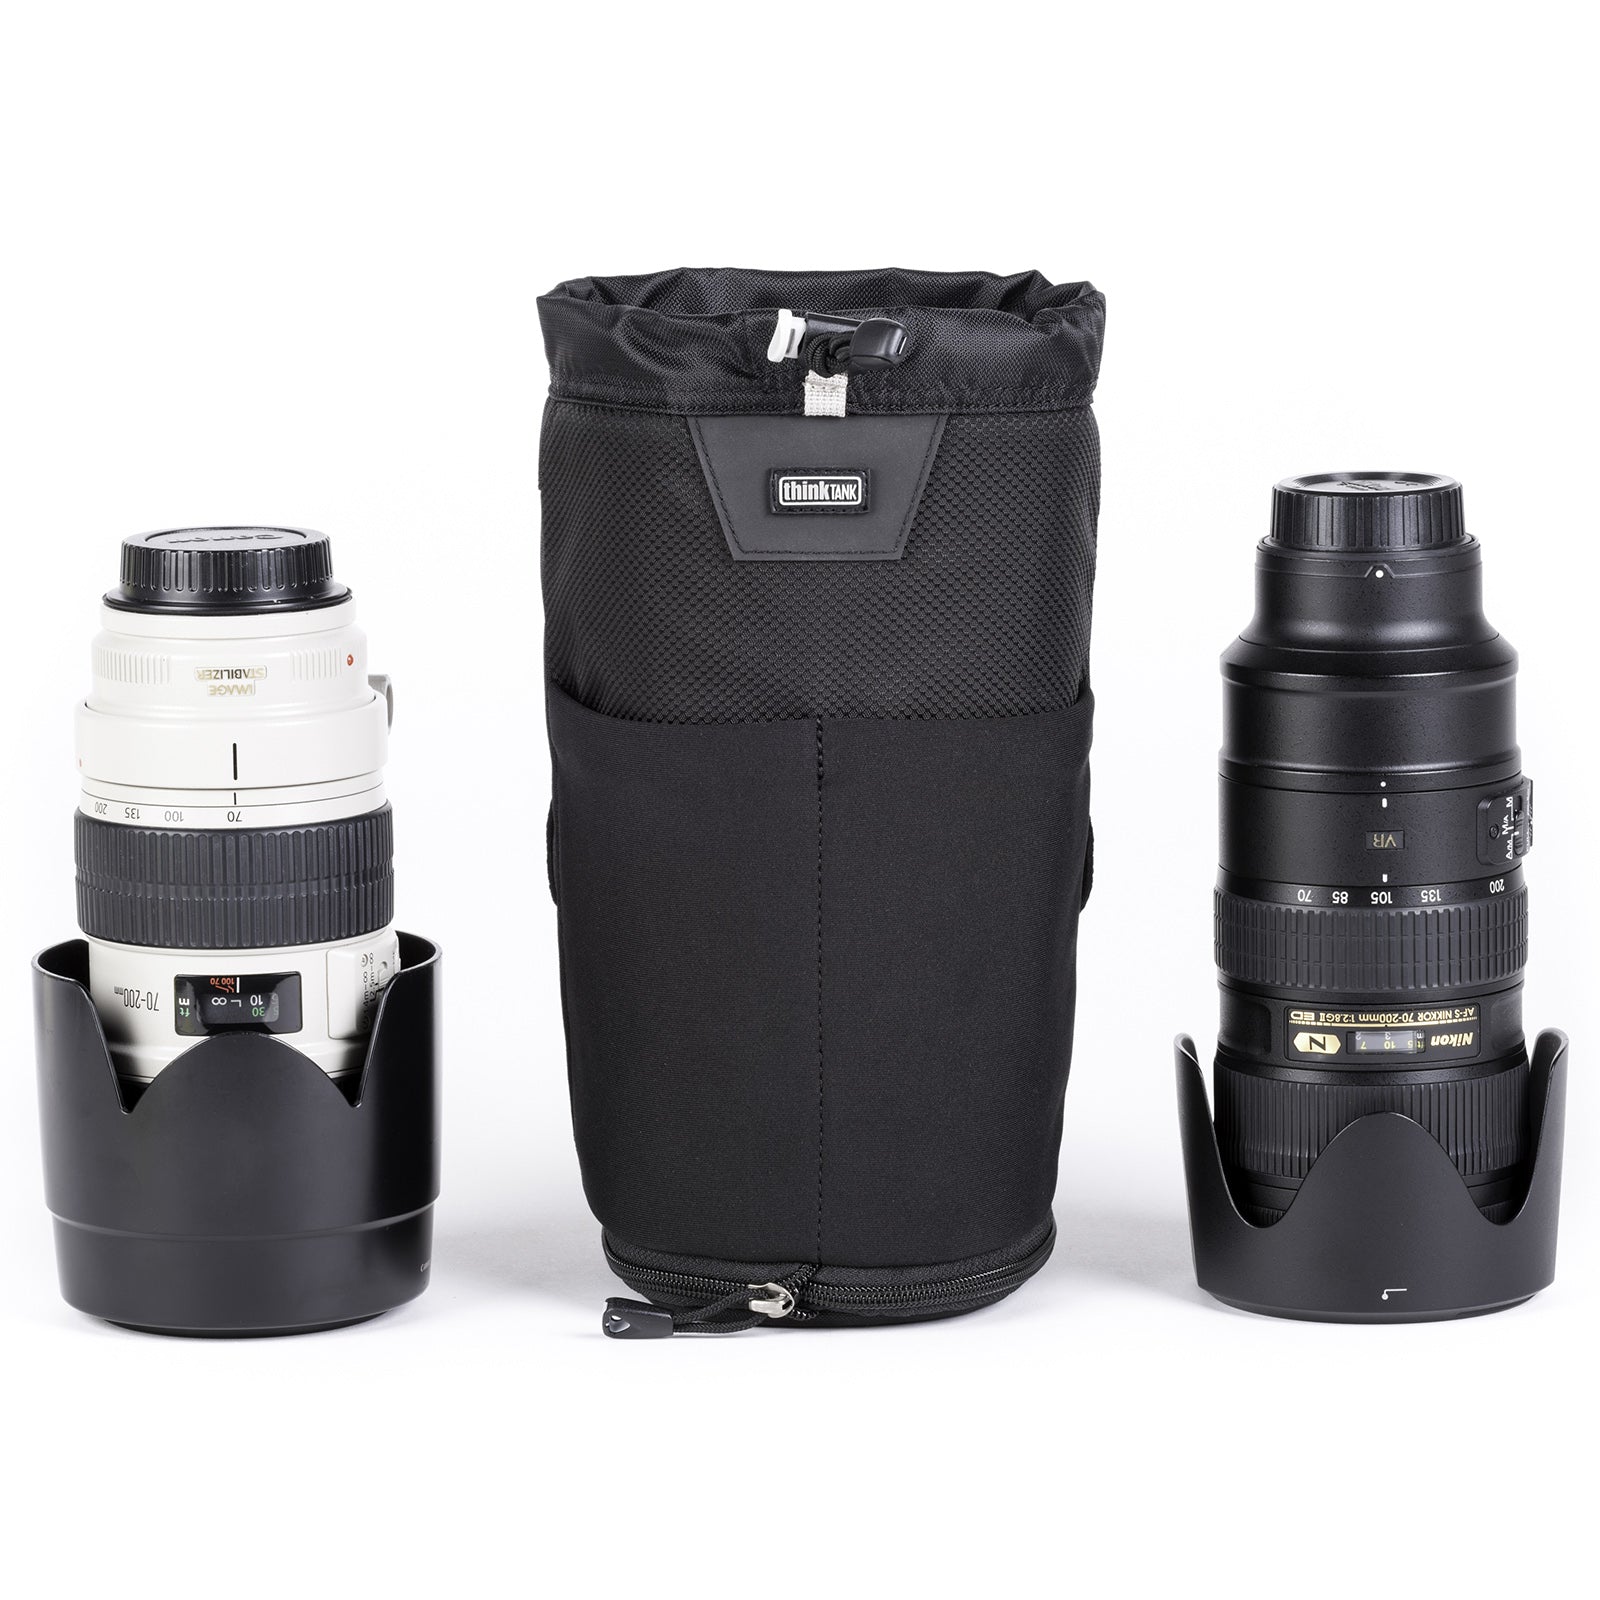 Modular pouch accommodates a 70–200mm f/2.8 lens with hood reversed or in shooting position when popped down